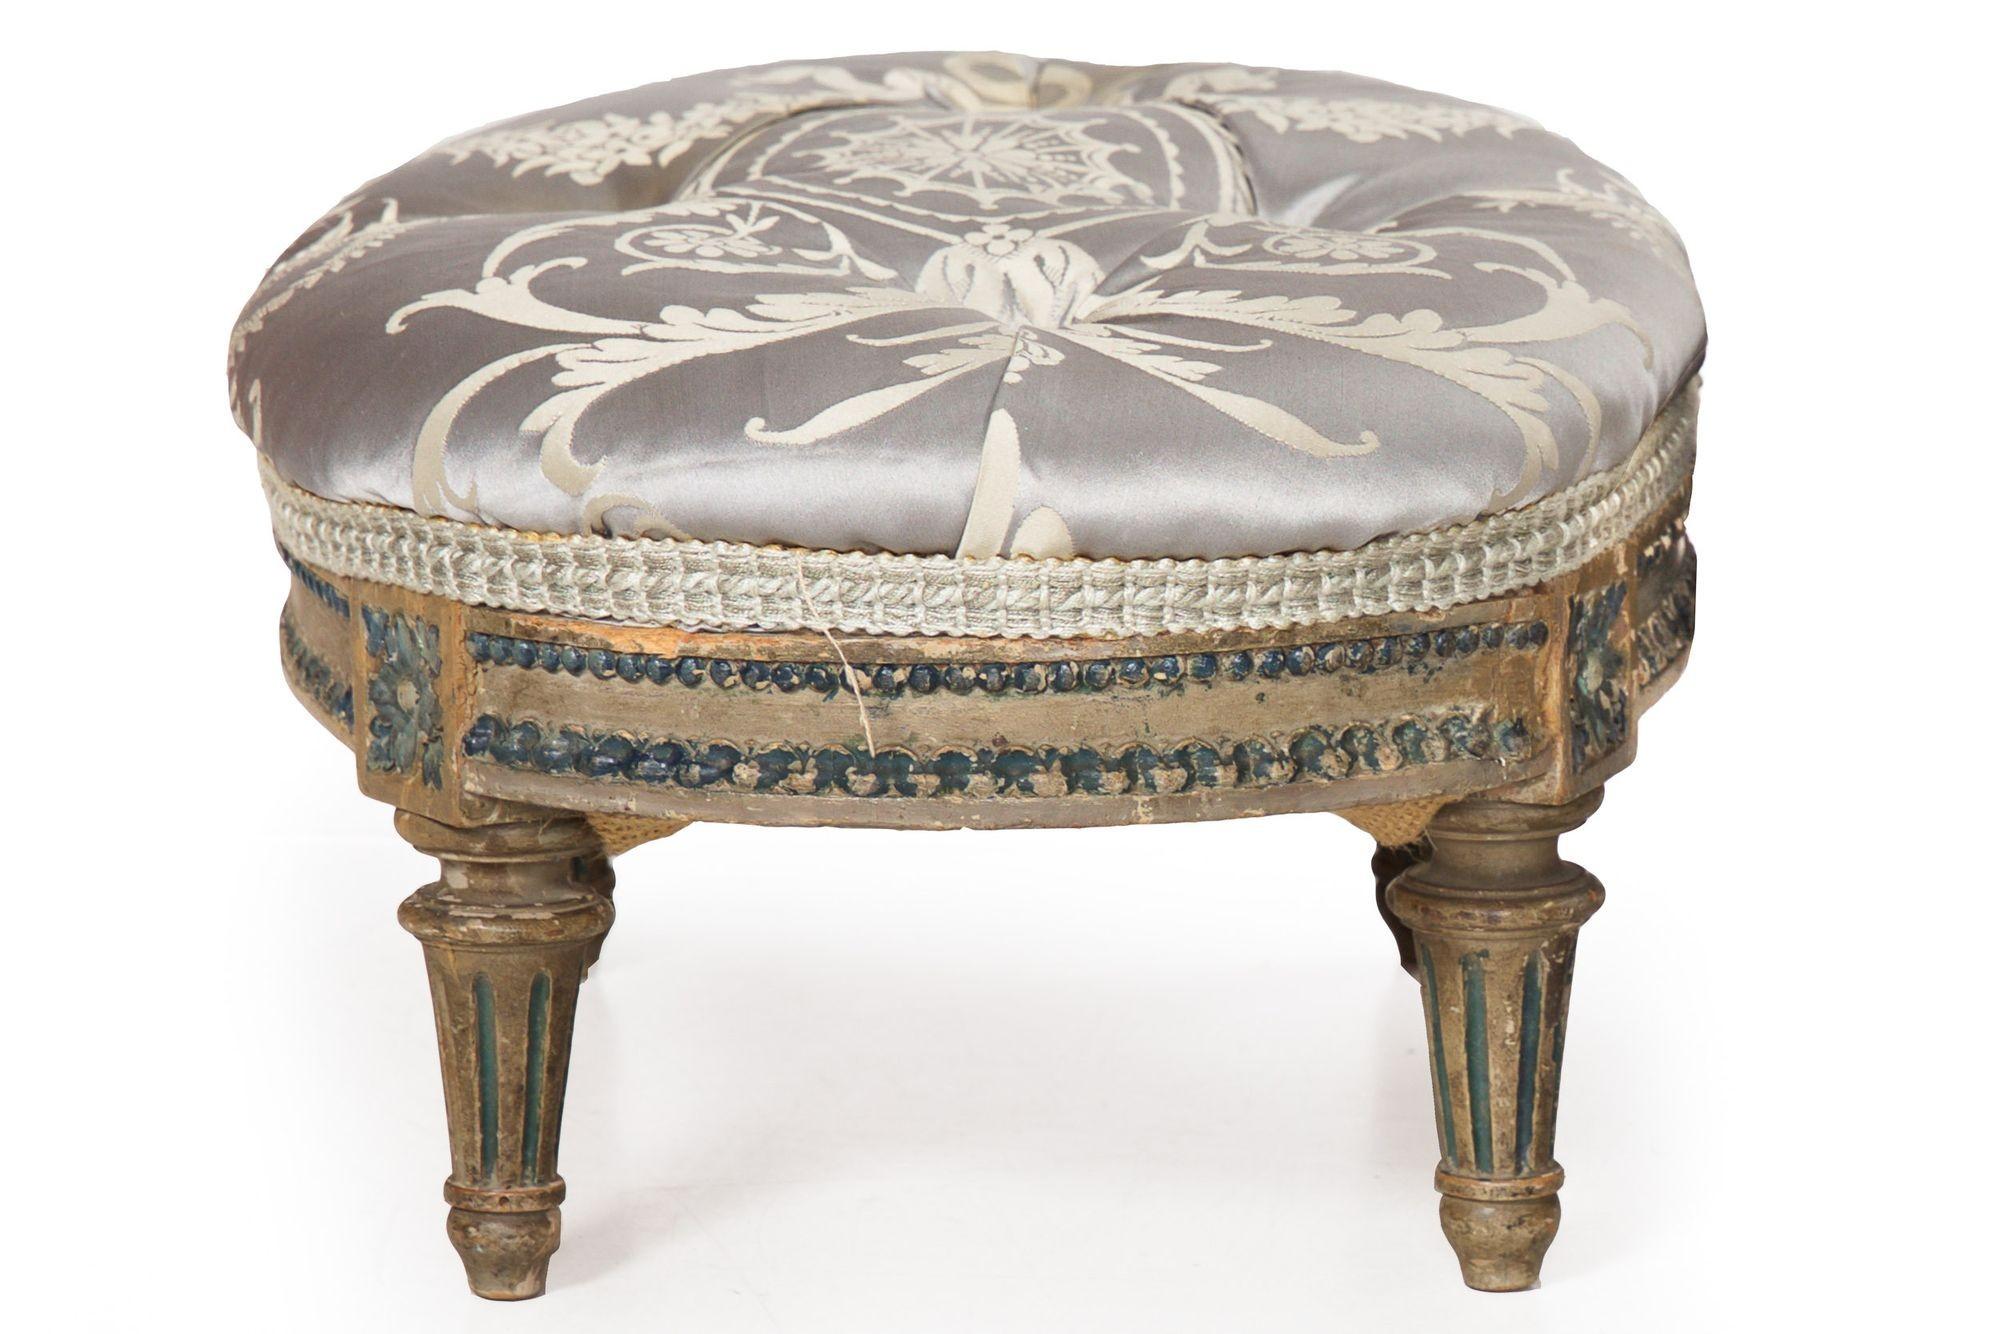 French Louis XVI Antique Footstool, 18th Century In Good Condition For Sale In Shippensburg, PA